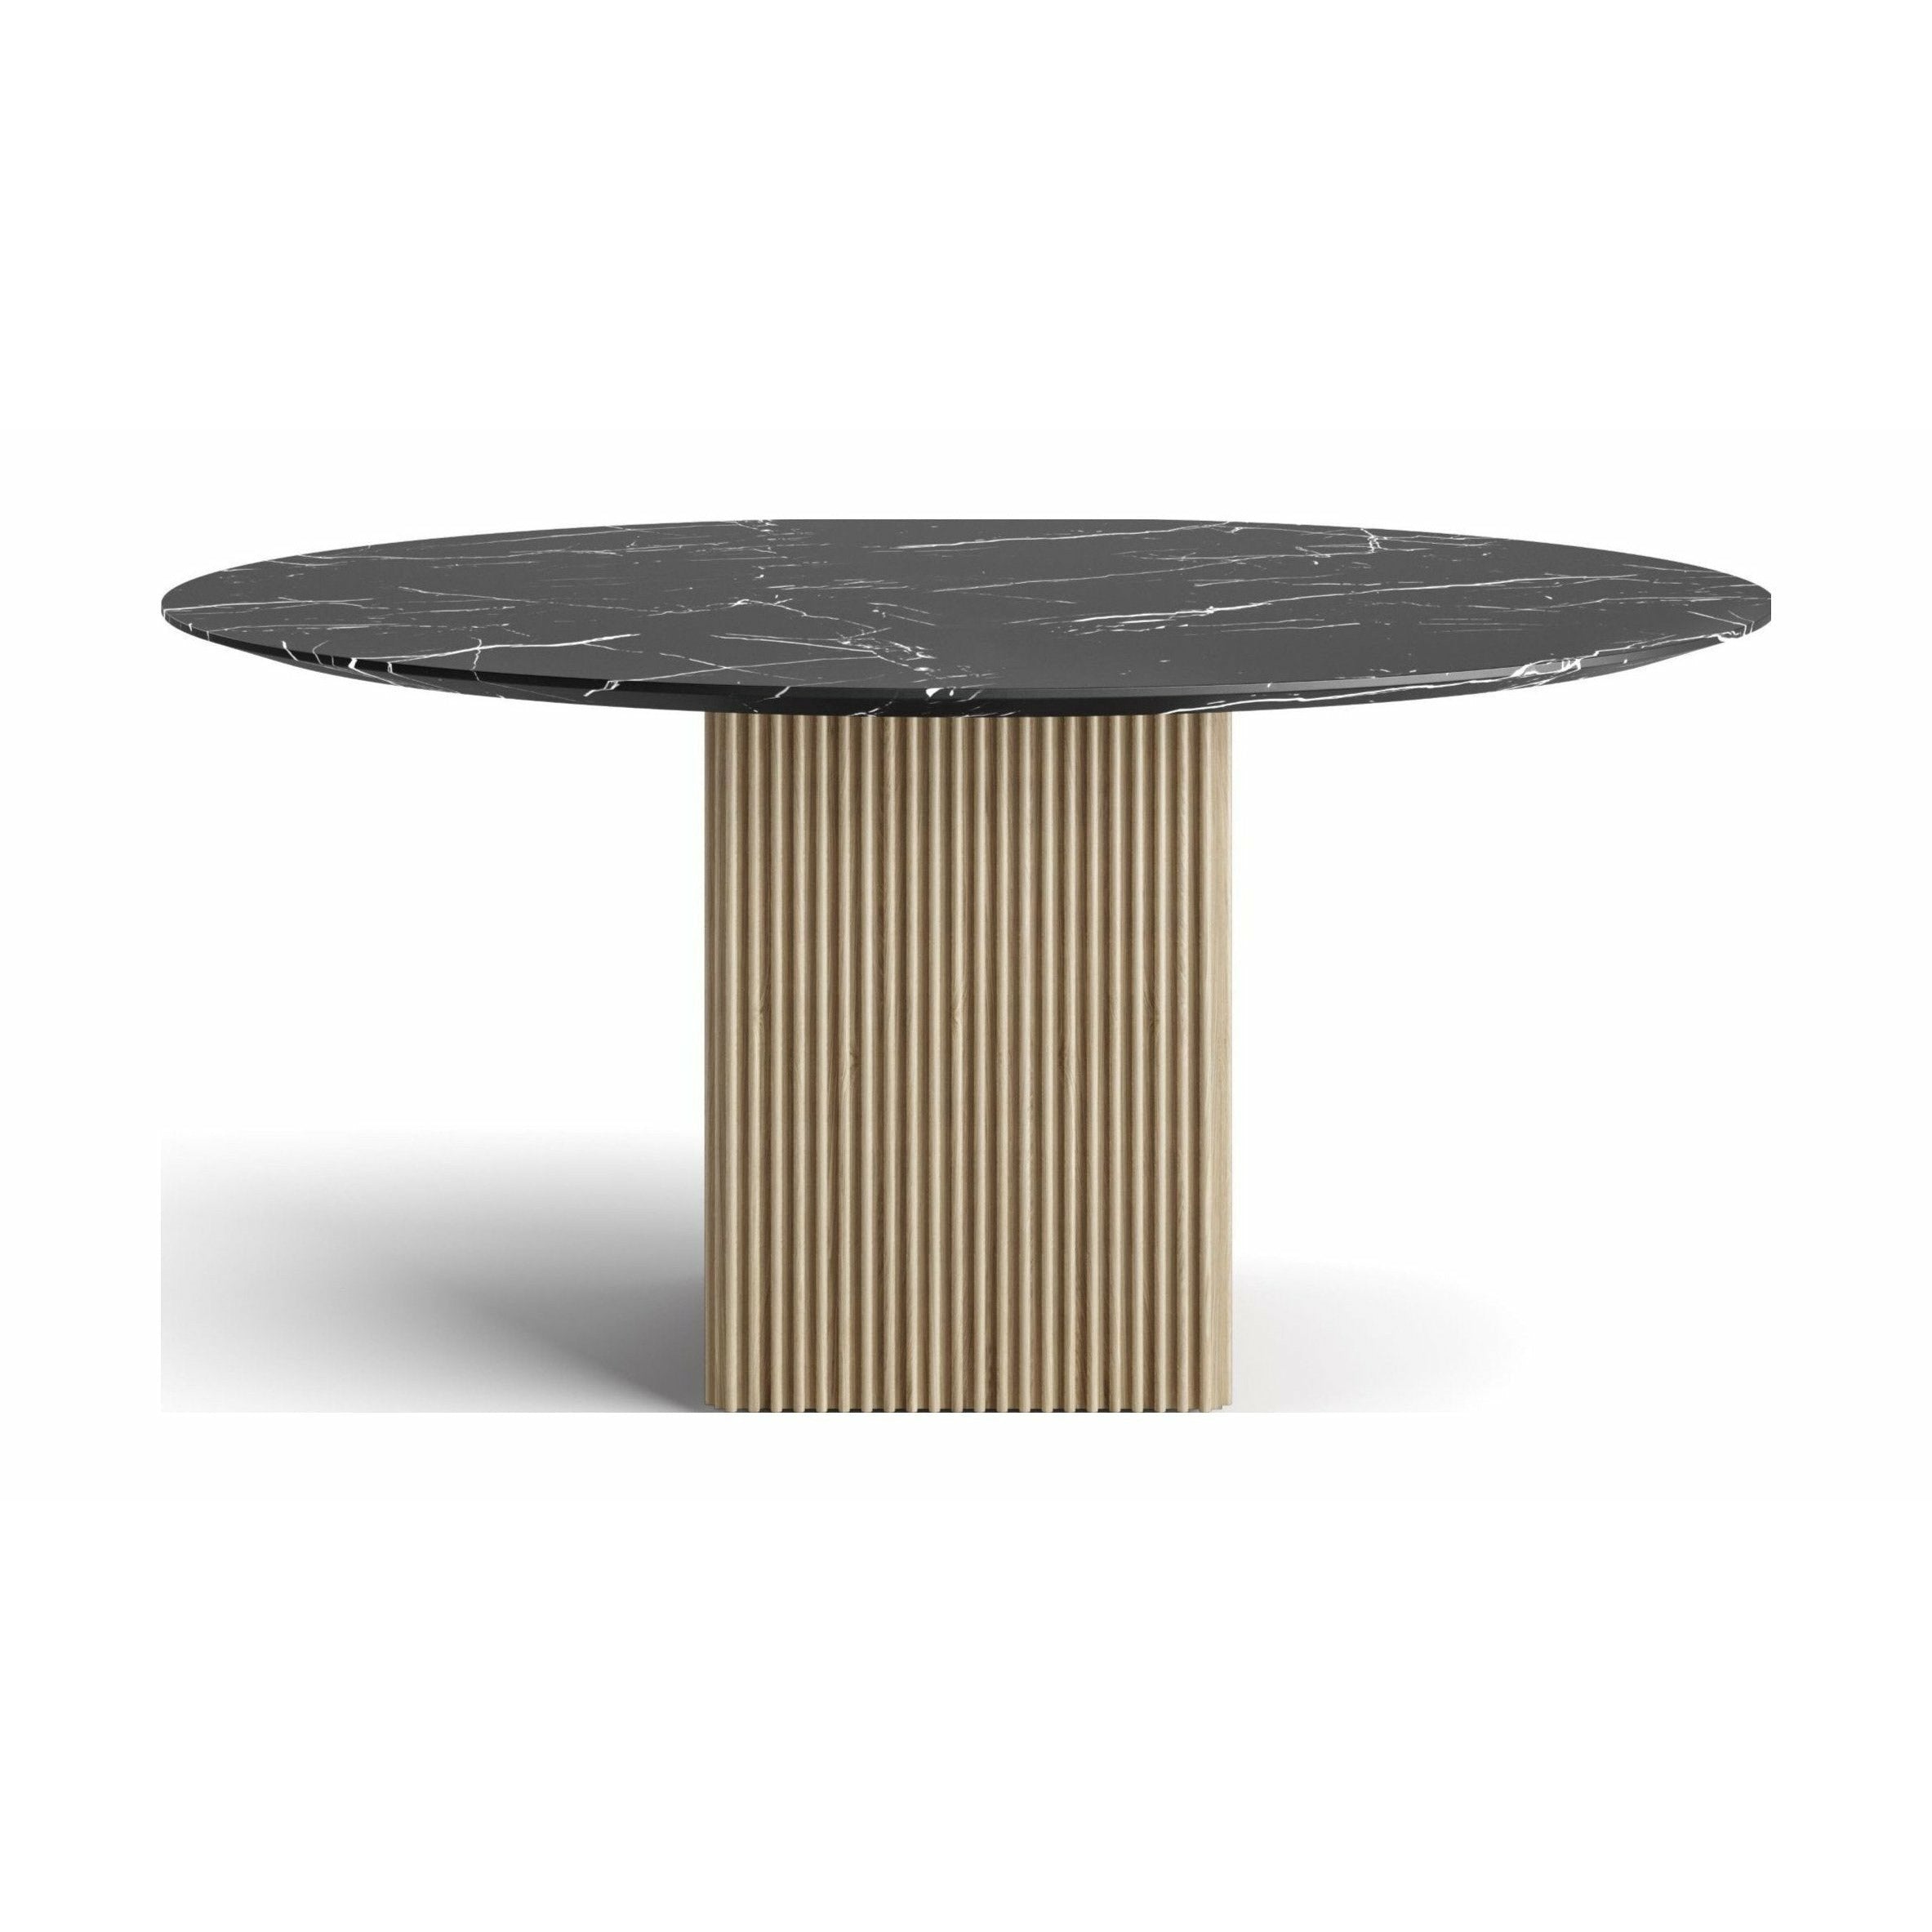 Dk3 Ten Round Dining Table Marble Marquina/Oak White Oiled, ø150 Cm